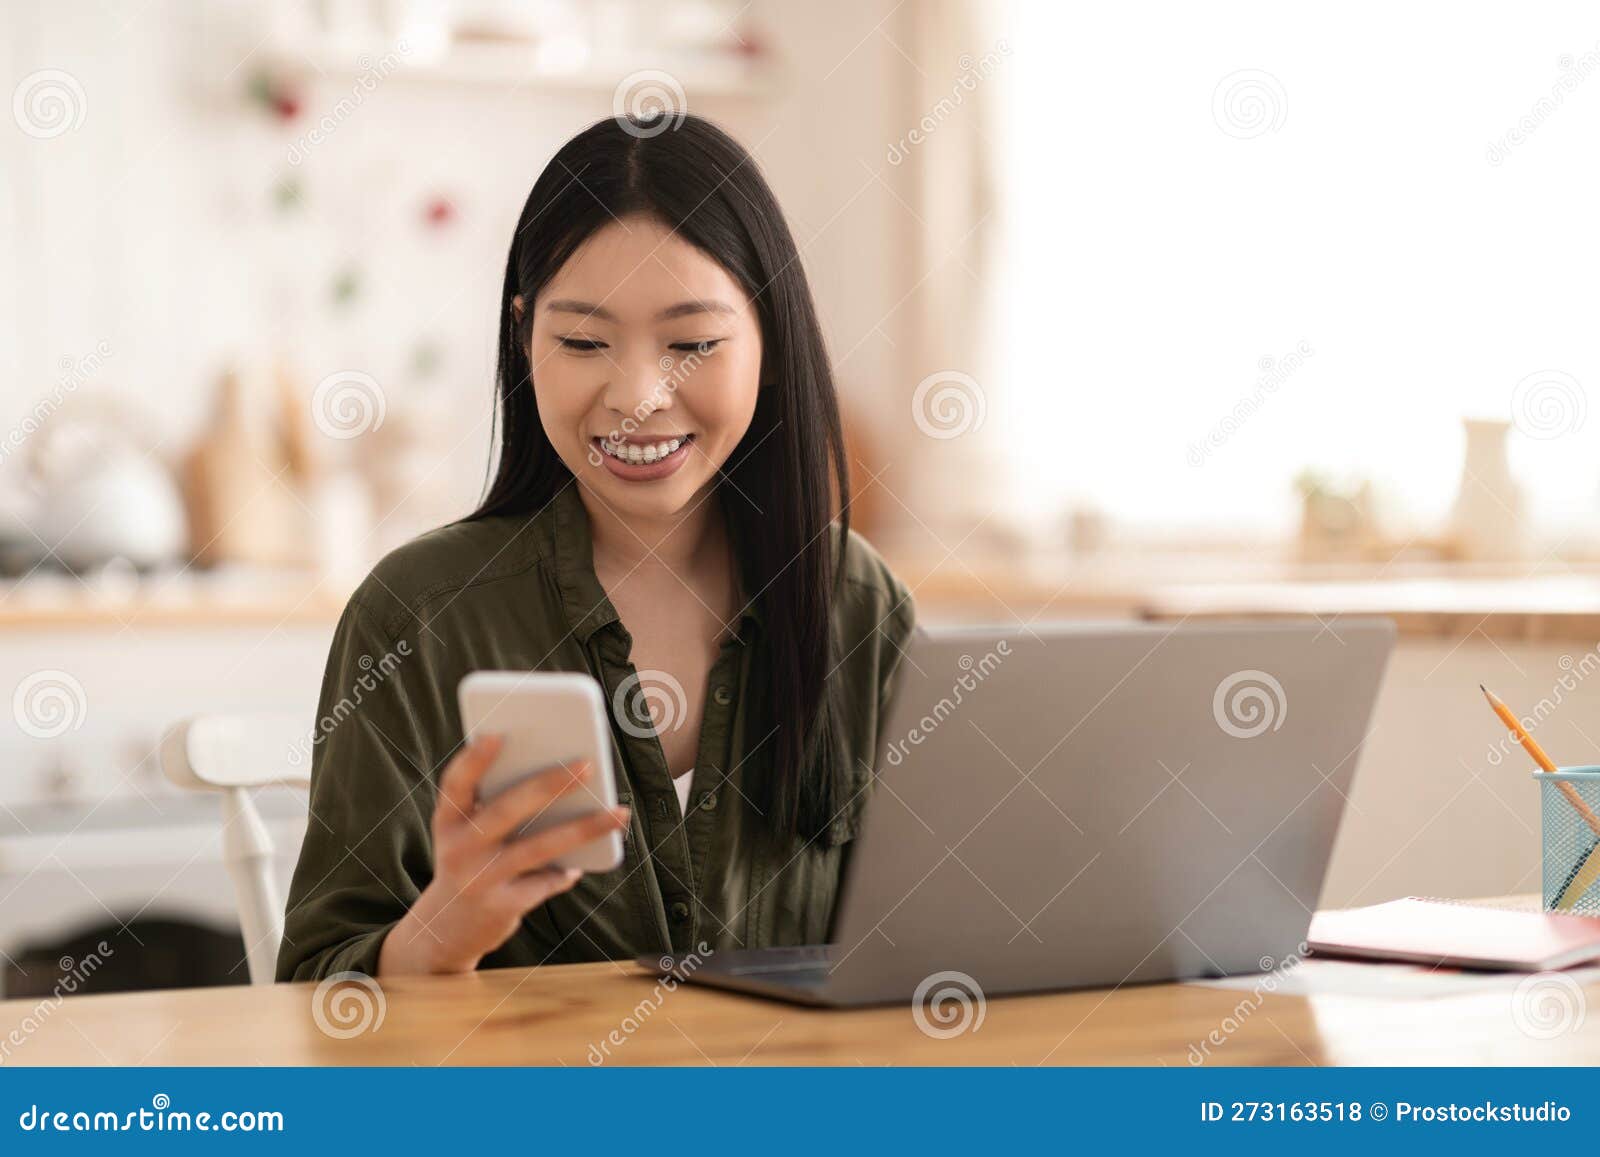 https://thumbs.dreamstime.com/z/positive-asian-woman-freelancer-working-home-using-gadgets-cheerful-pretty-young-female-independent-contractor-sitting-273163518.jpg